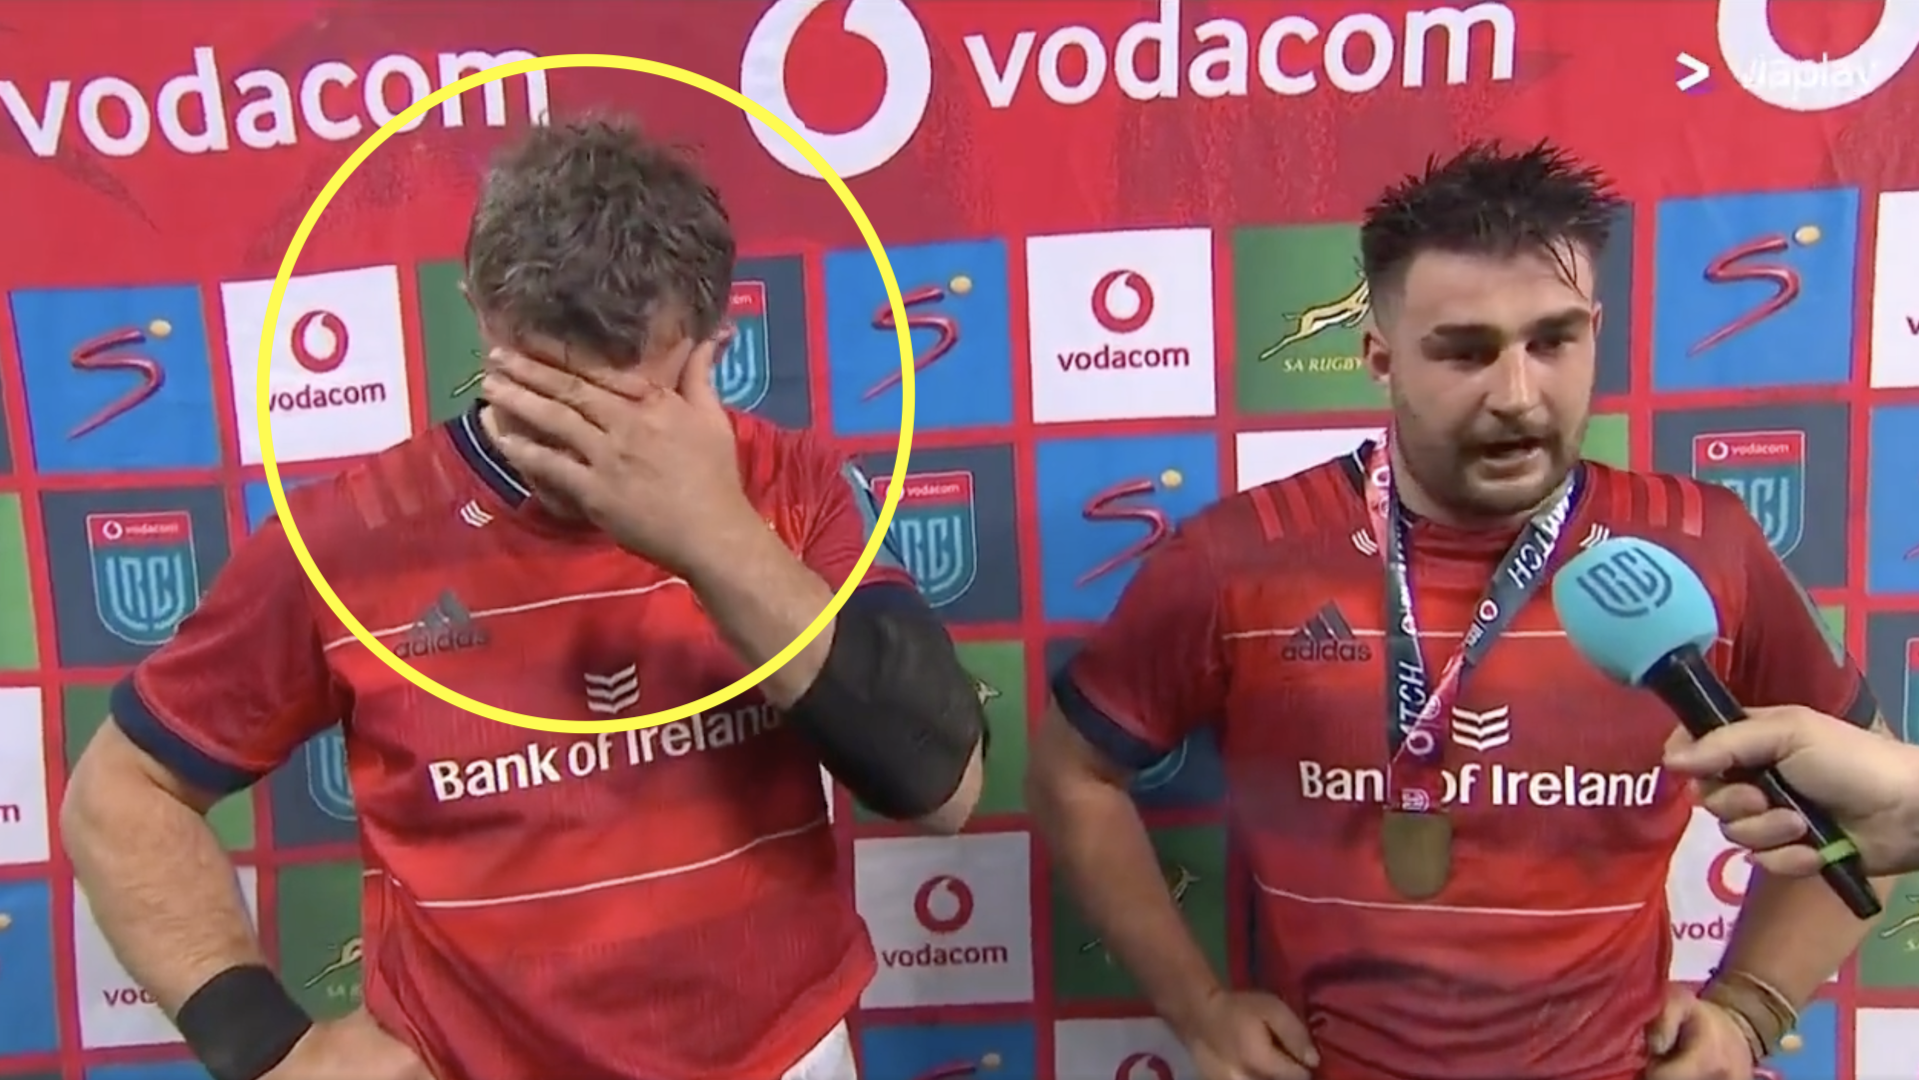 Munster captain hangs his head in shame over hero's X-rated interview